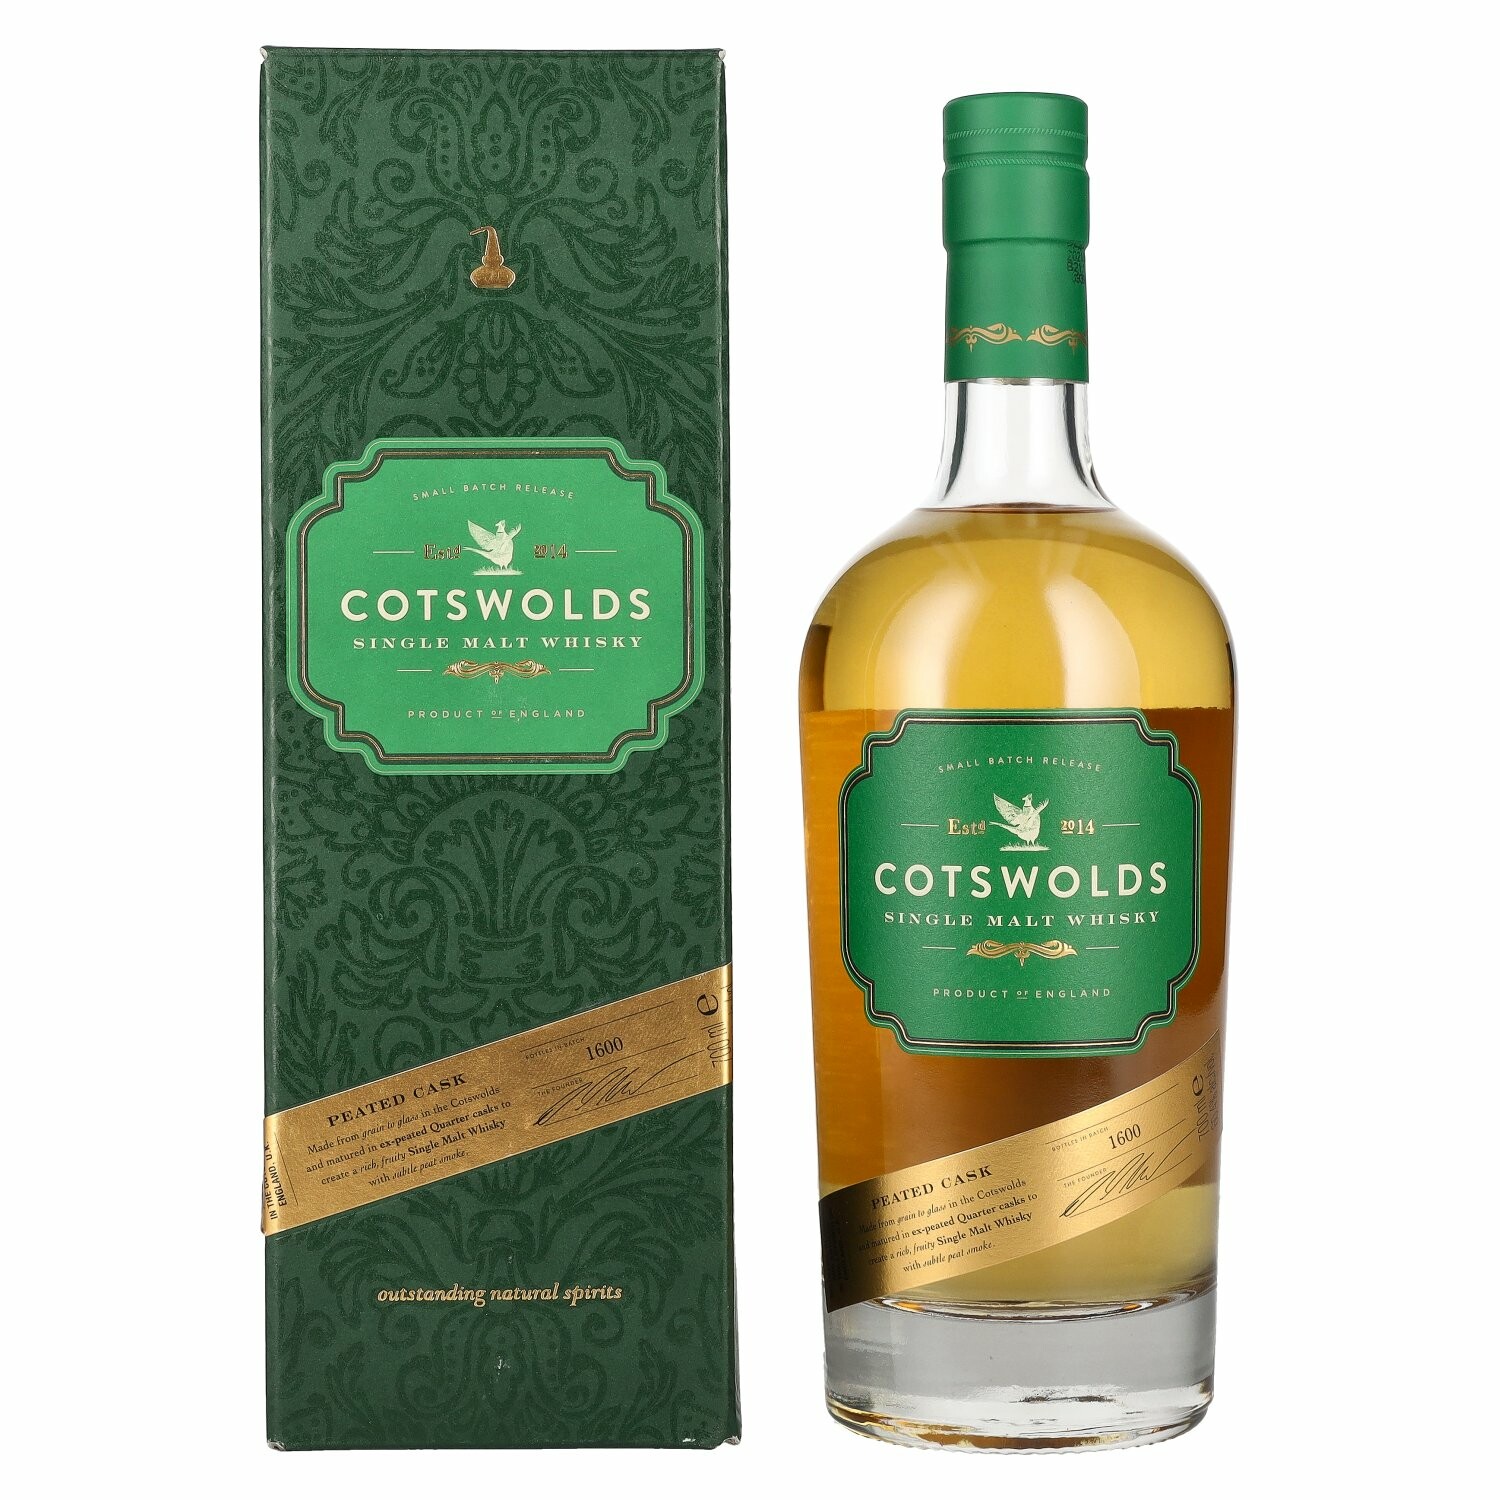 Cotswolds PEATED CASK Single Malt Whisky 60,4% Vol. 0,7l in Giftbox